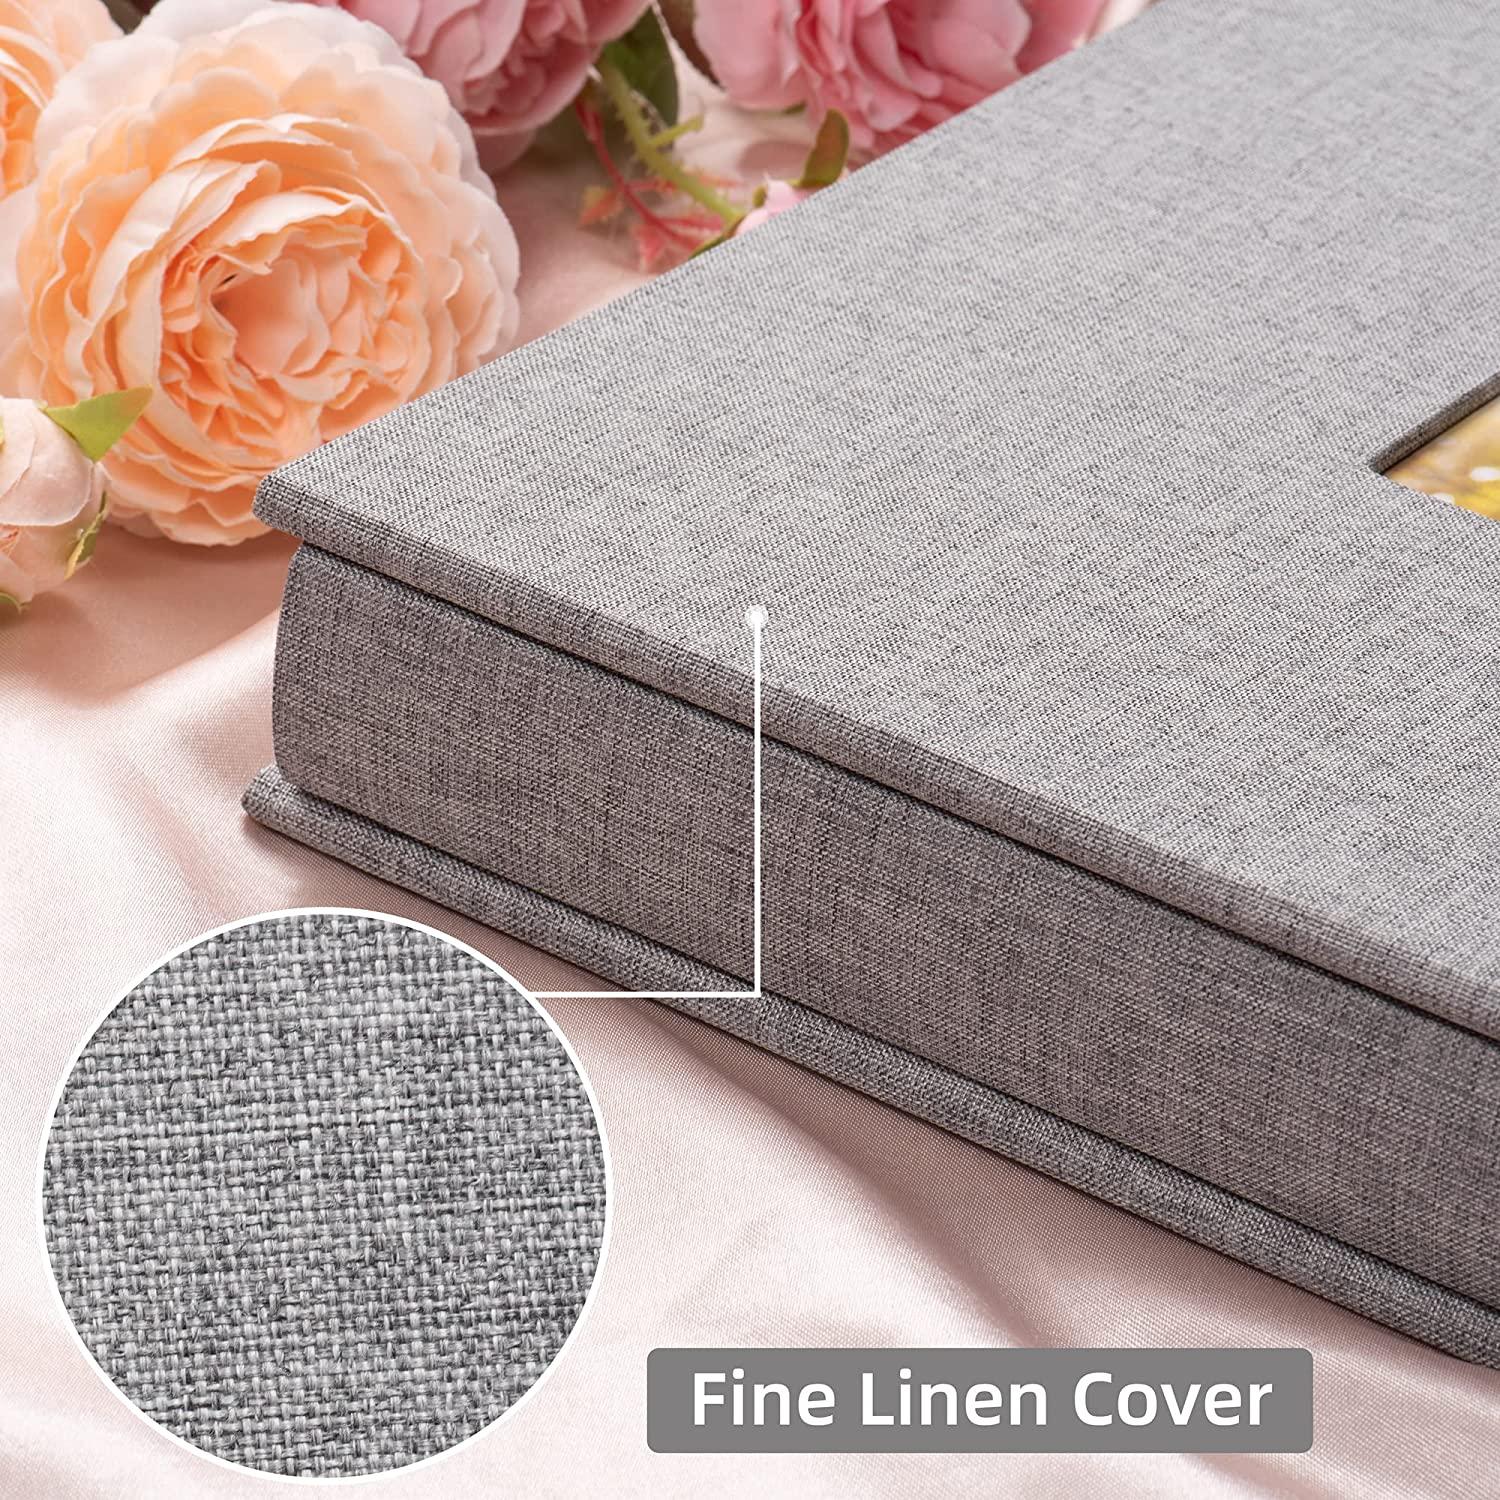 Lanpn Photo Album 11x14, Linen Hard Cover Acid Free Slip Slide in Photo  Albums Sleeves Holds 50 Top Load Vertical Only 11x14 Pictures (Grey)